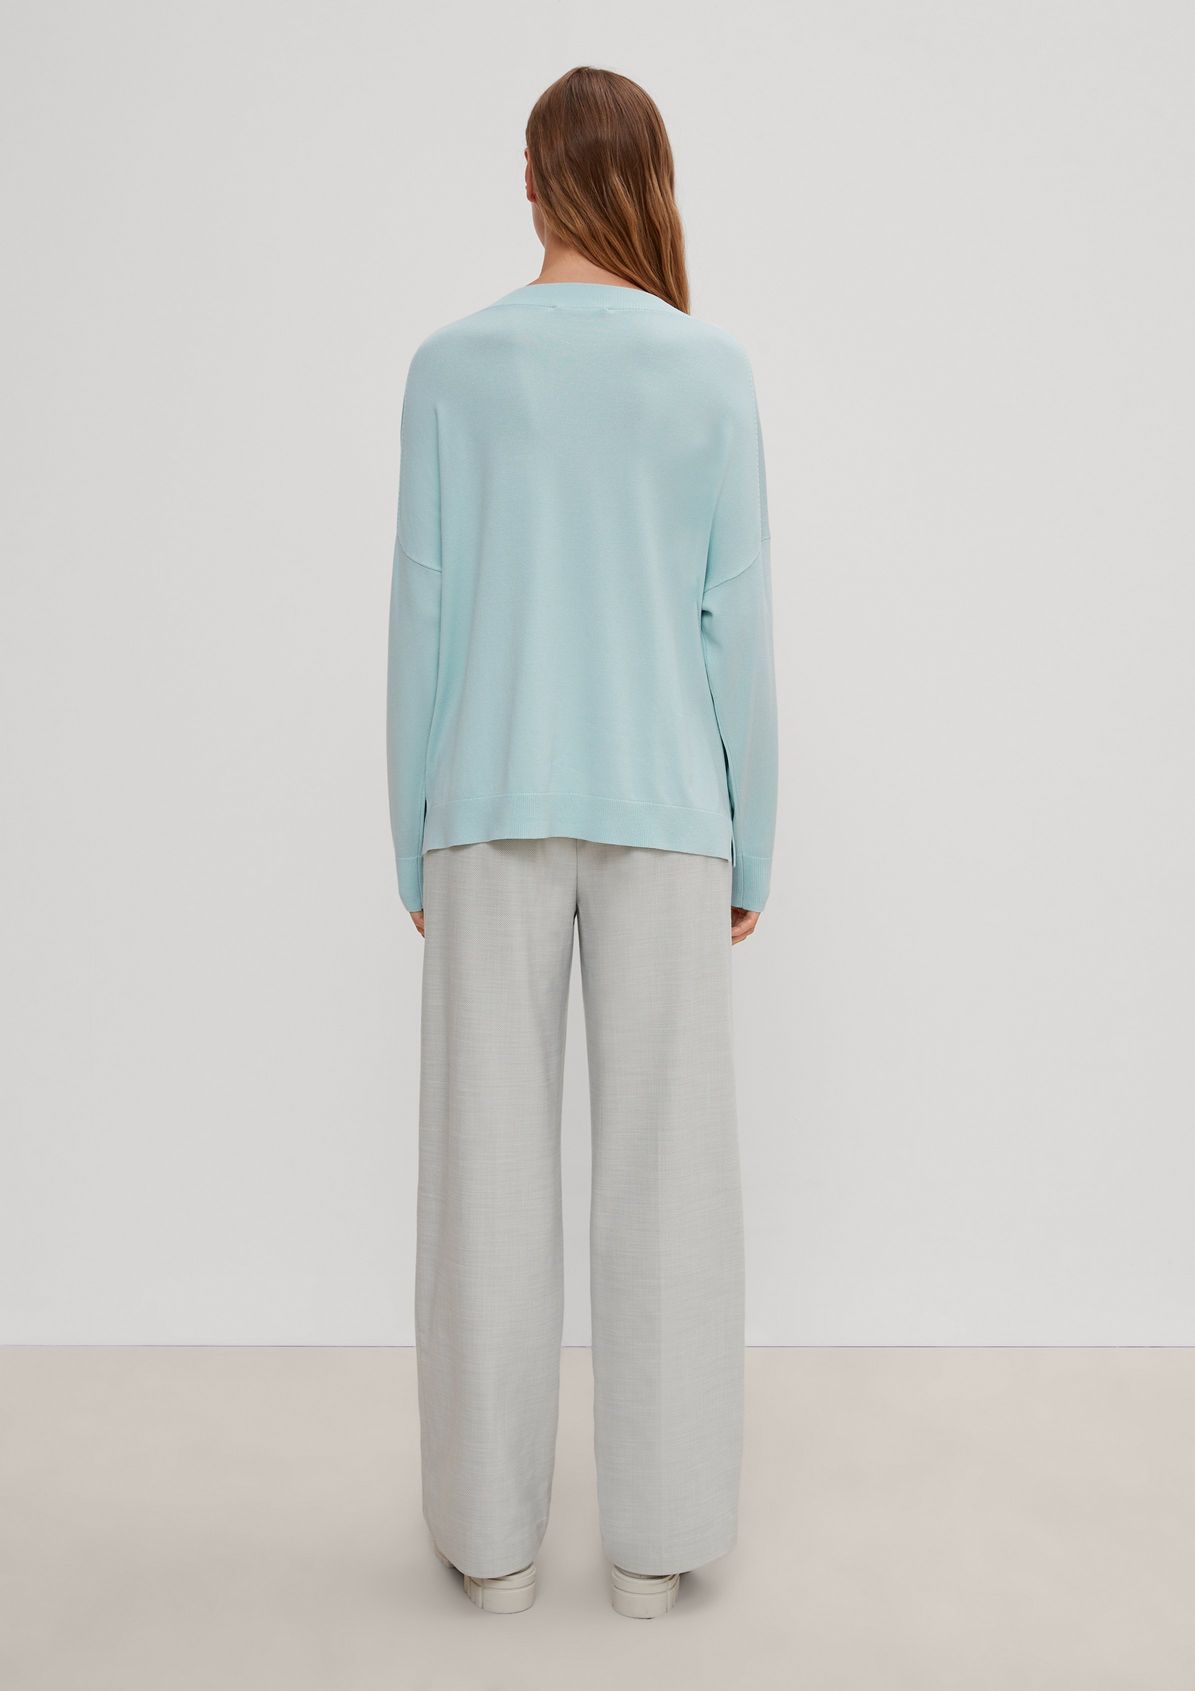 Jumper with a V-neckline from comma